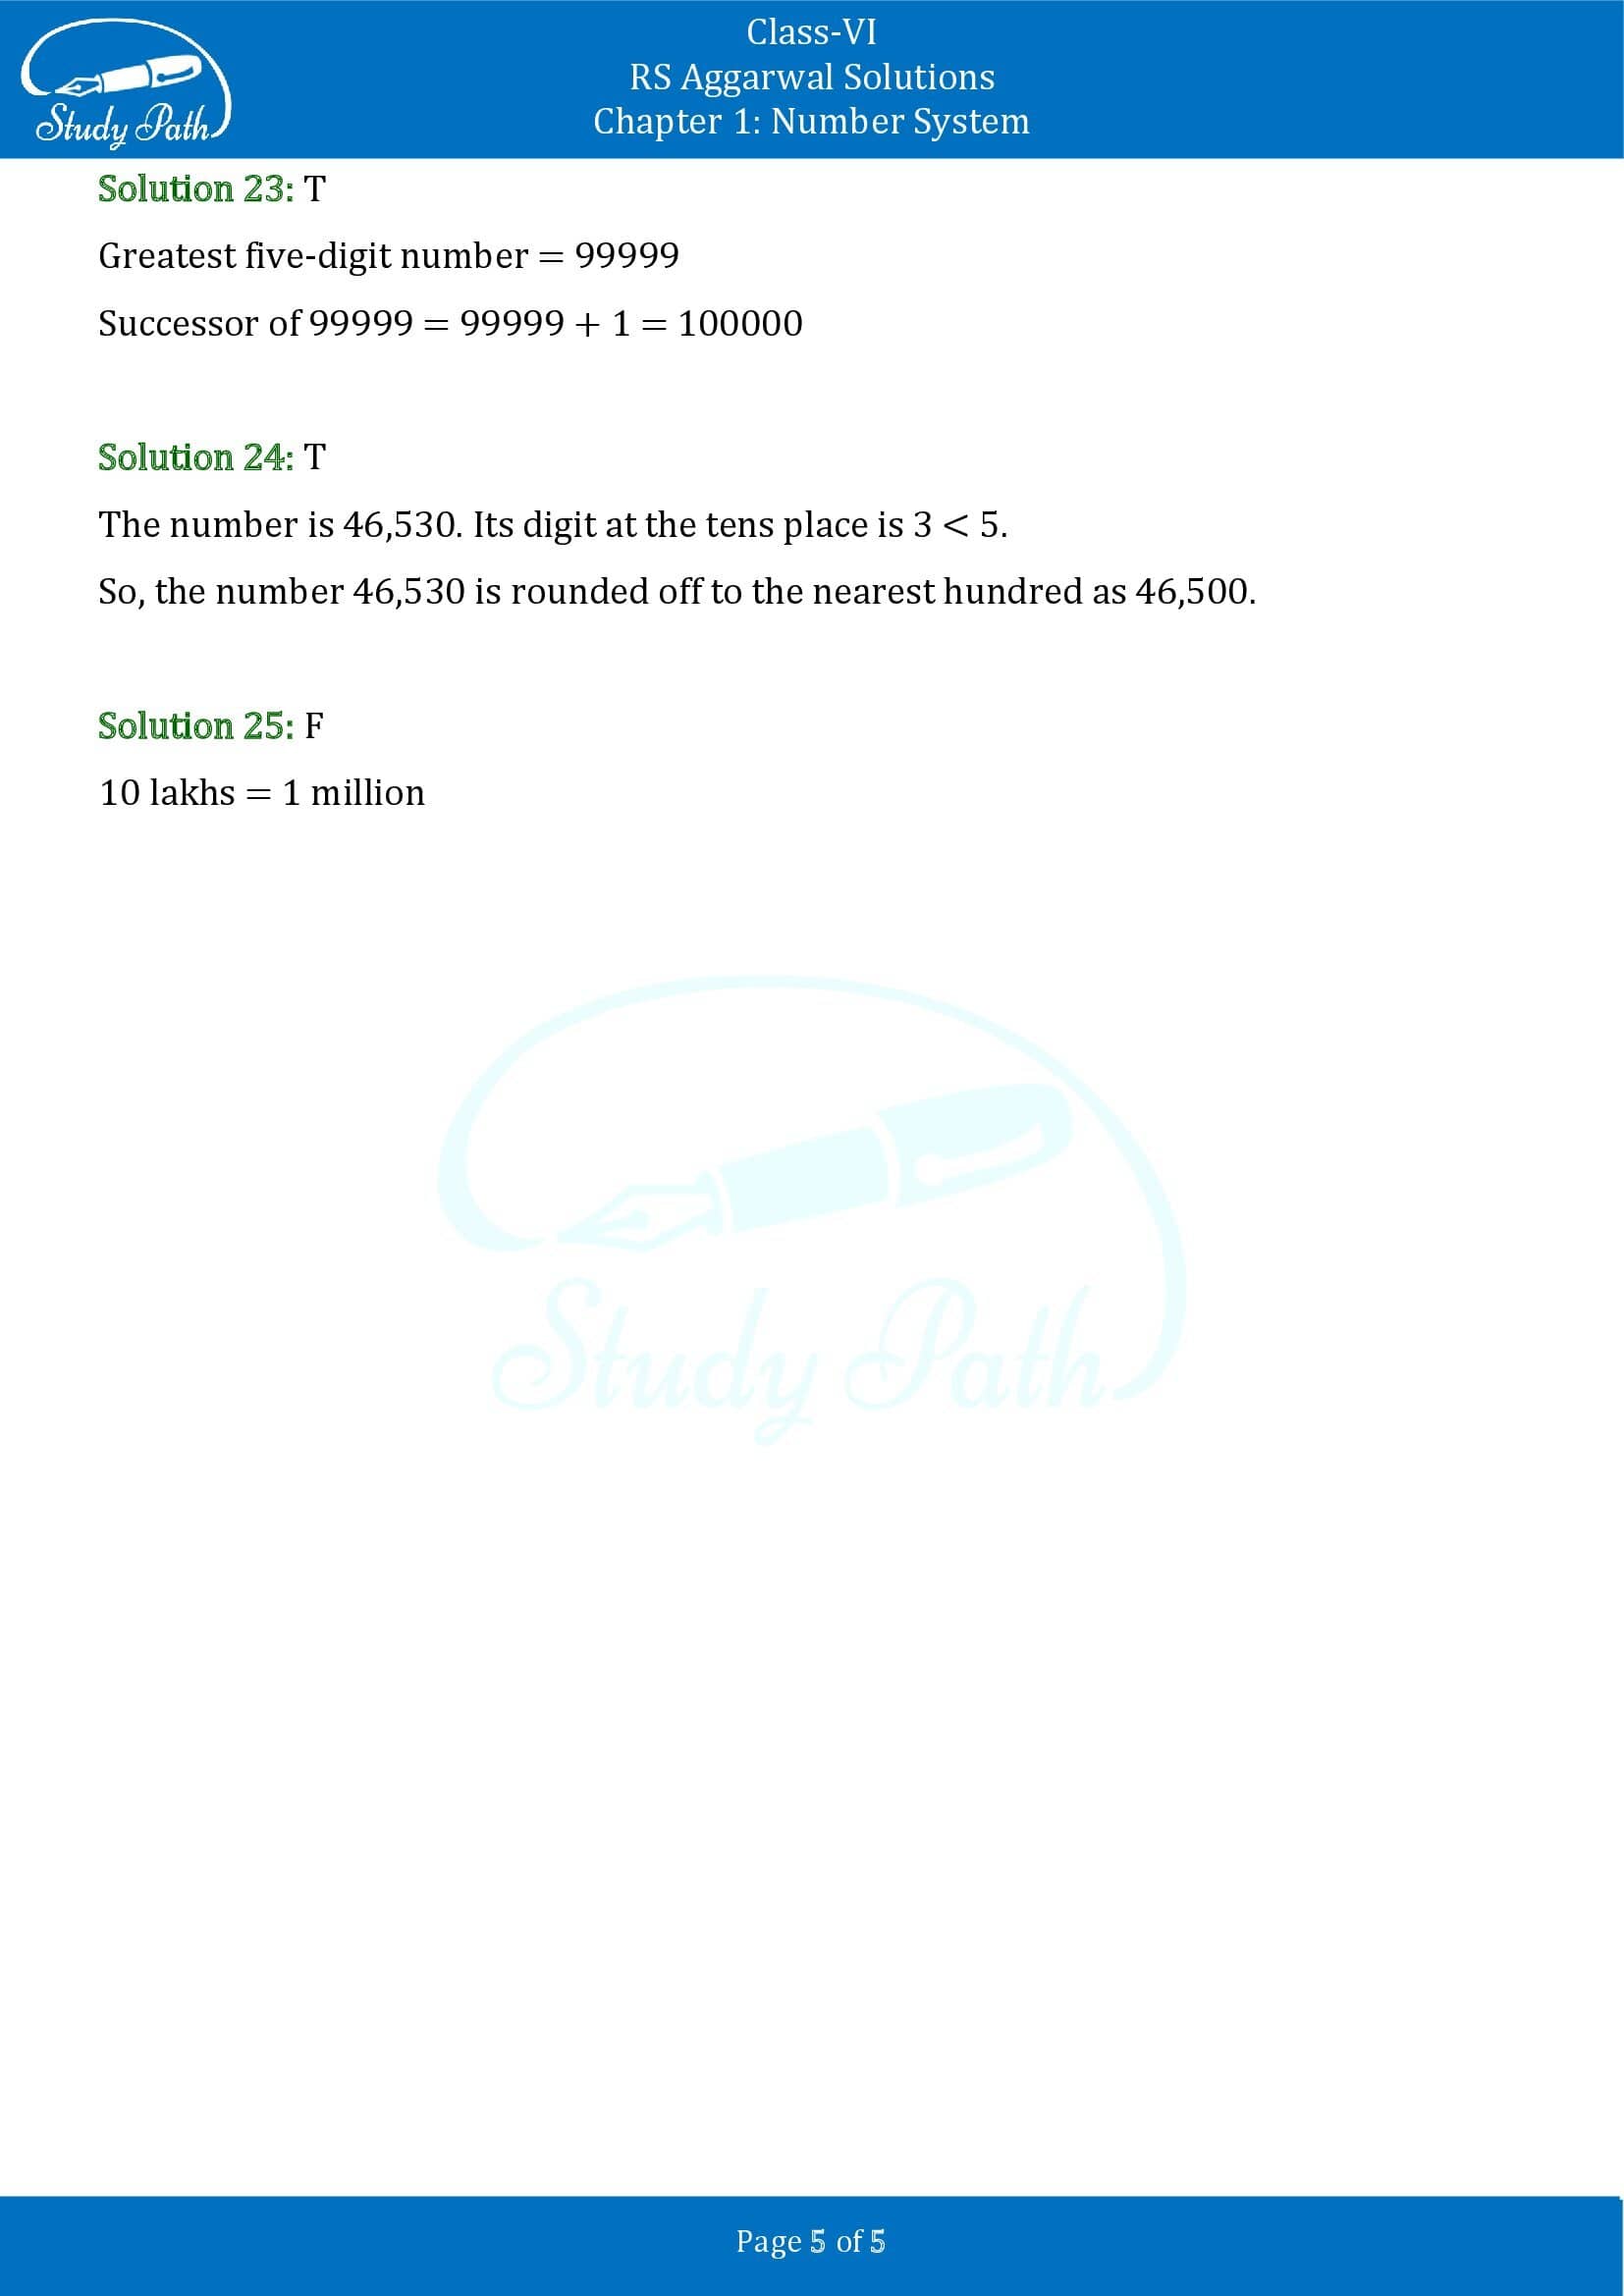 RS Aggarwal Solutions Class 6 Chapter 1 Number System Test Paper 00005